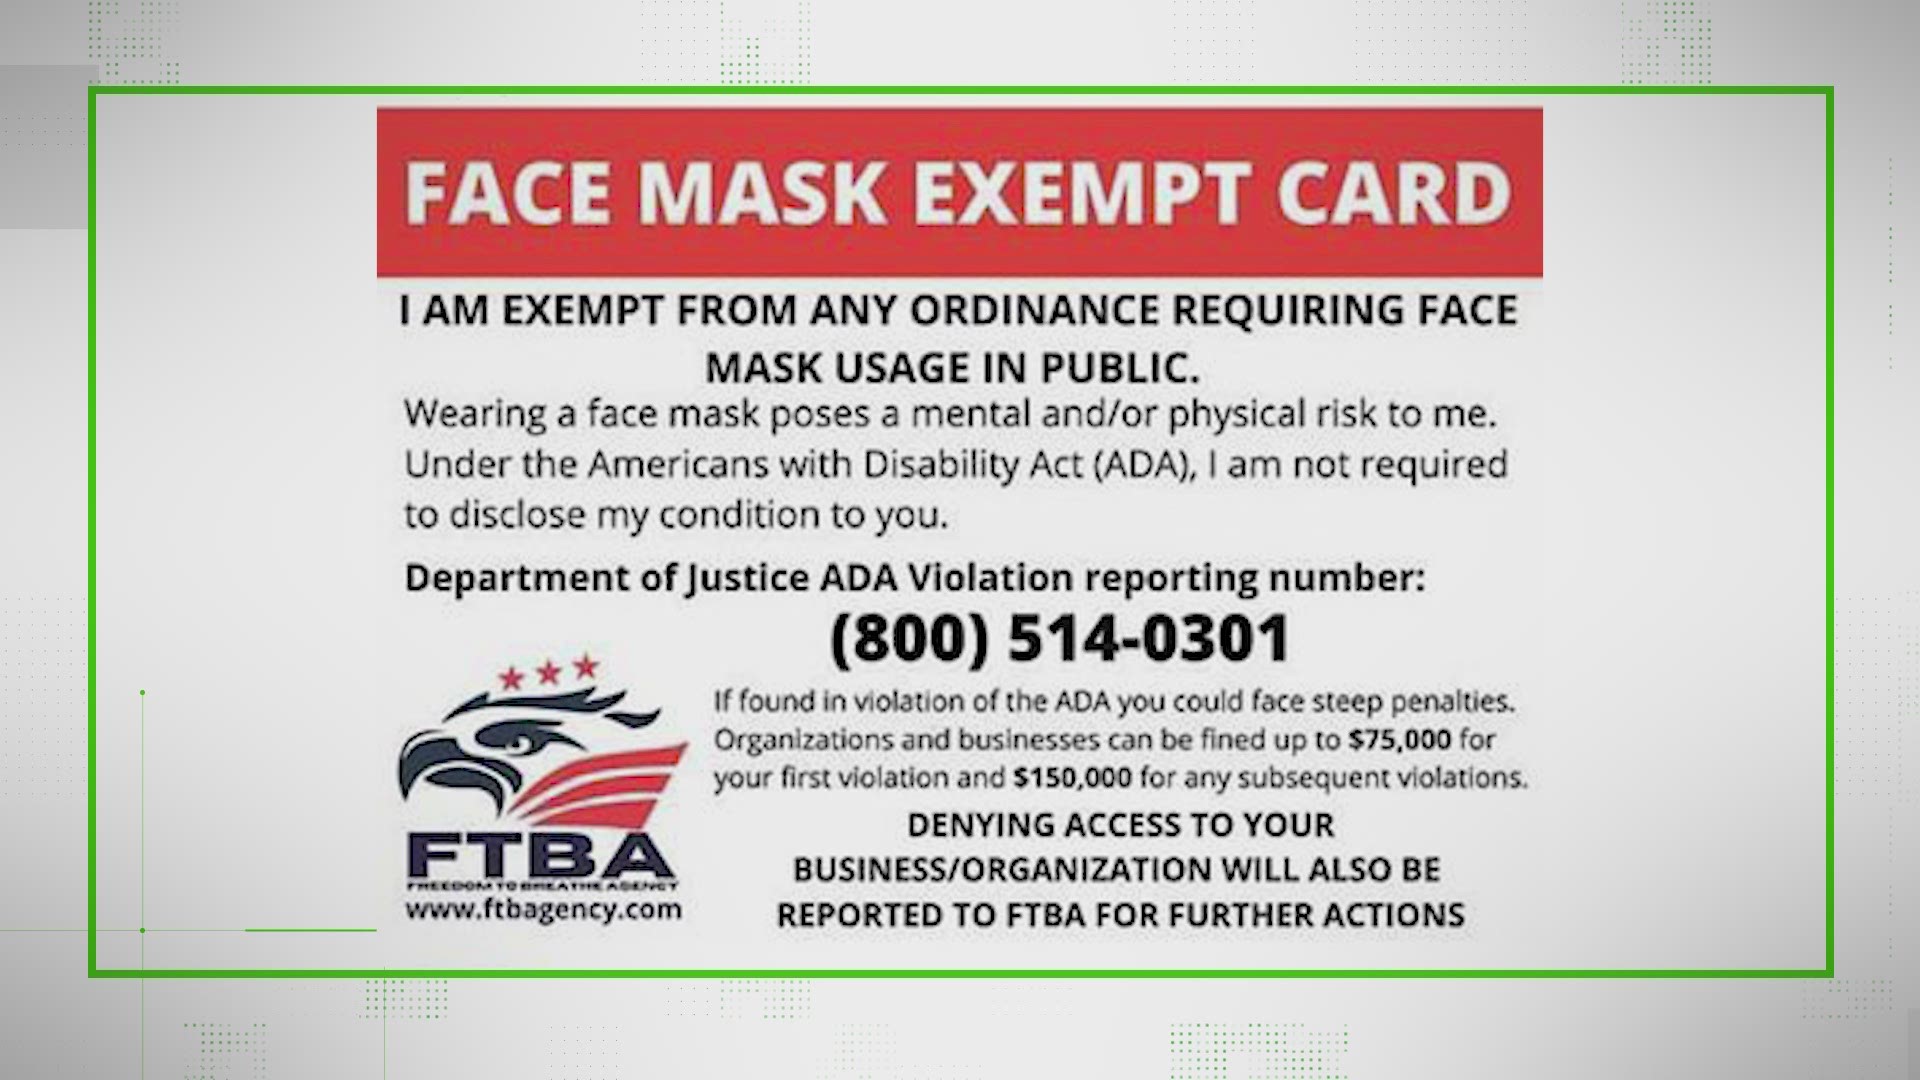 Viral claims say people who don't want to wear masks should carry a card that cites the DOJ and ADA. They're fake.